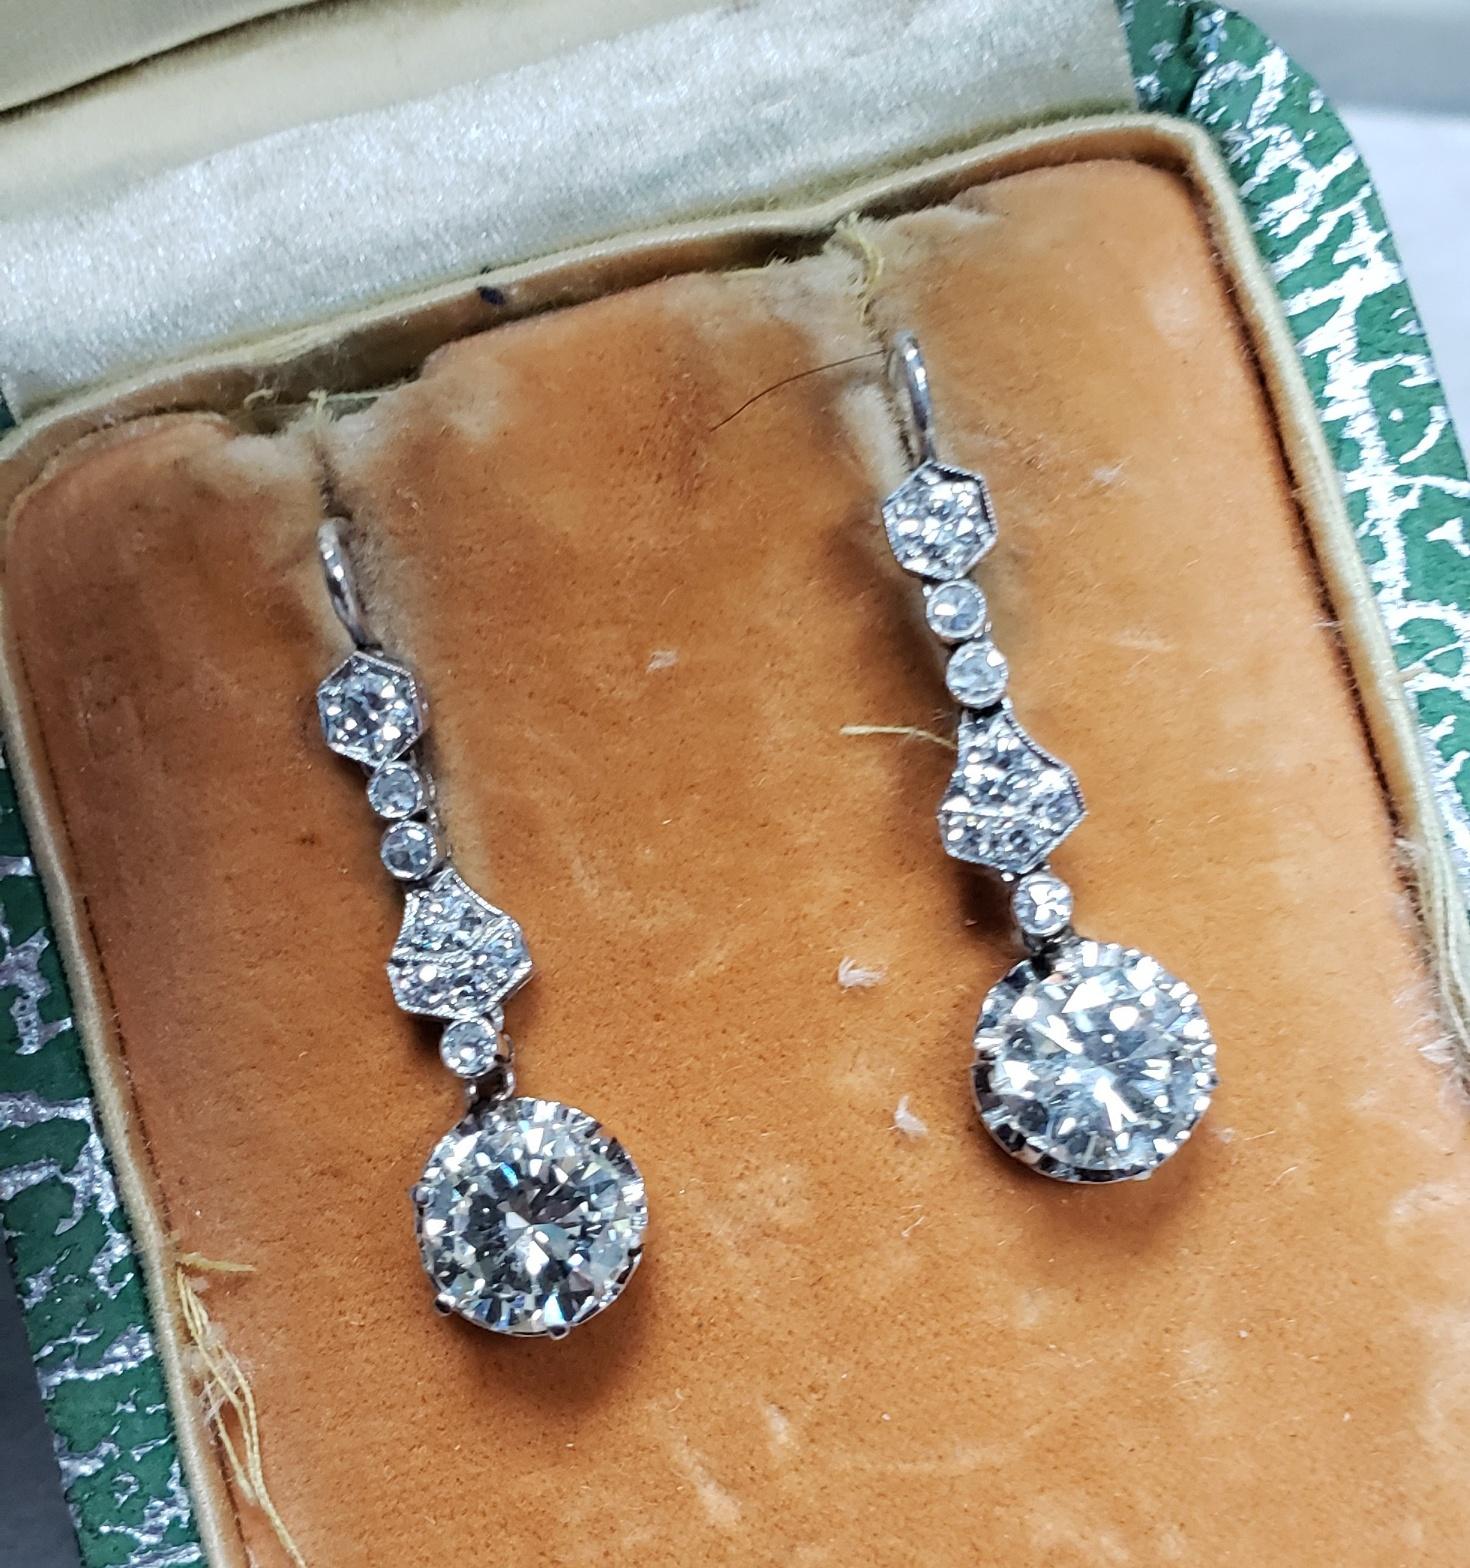 Beautiful Art Deco diamond filigree earrings. Earrings encrusted with round brilliant cut natural diamonds - we estimate 1.00CT total weight (measuring from 1.5 to 3.0MM in diameter. F-G in color SI1-I1 in clarity - sparkly stones). Dangling part of